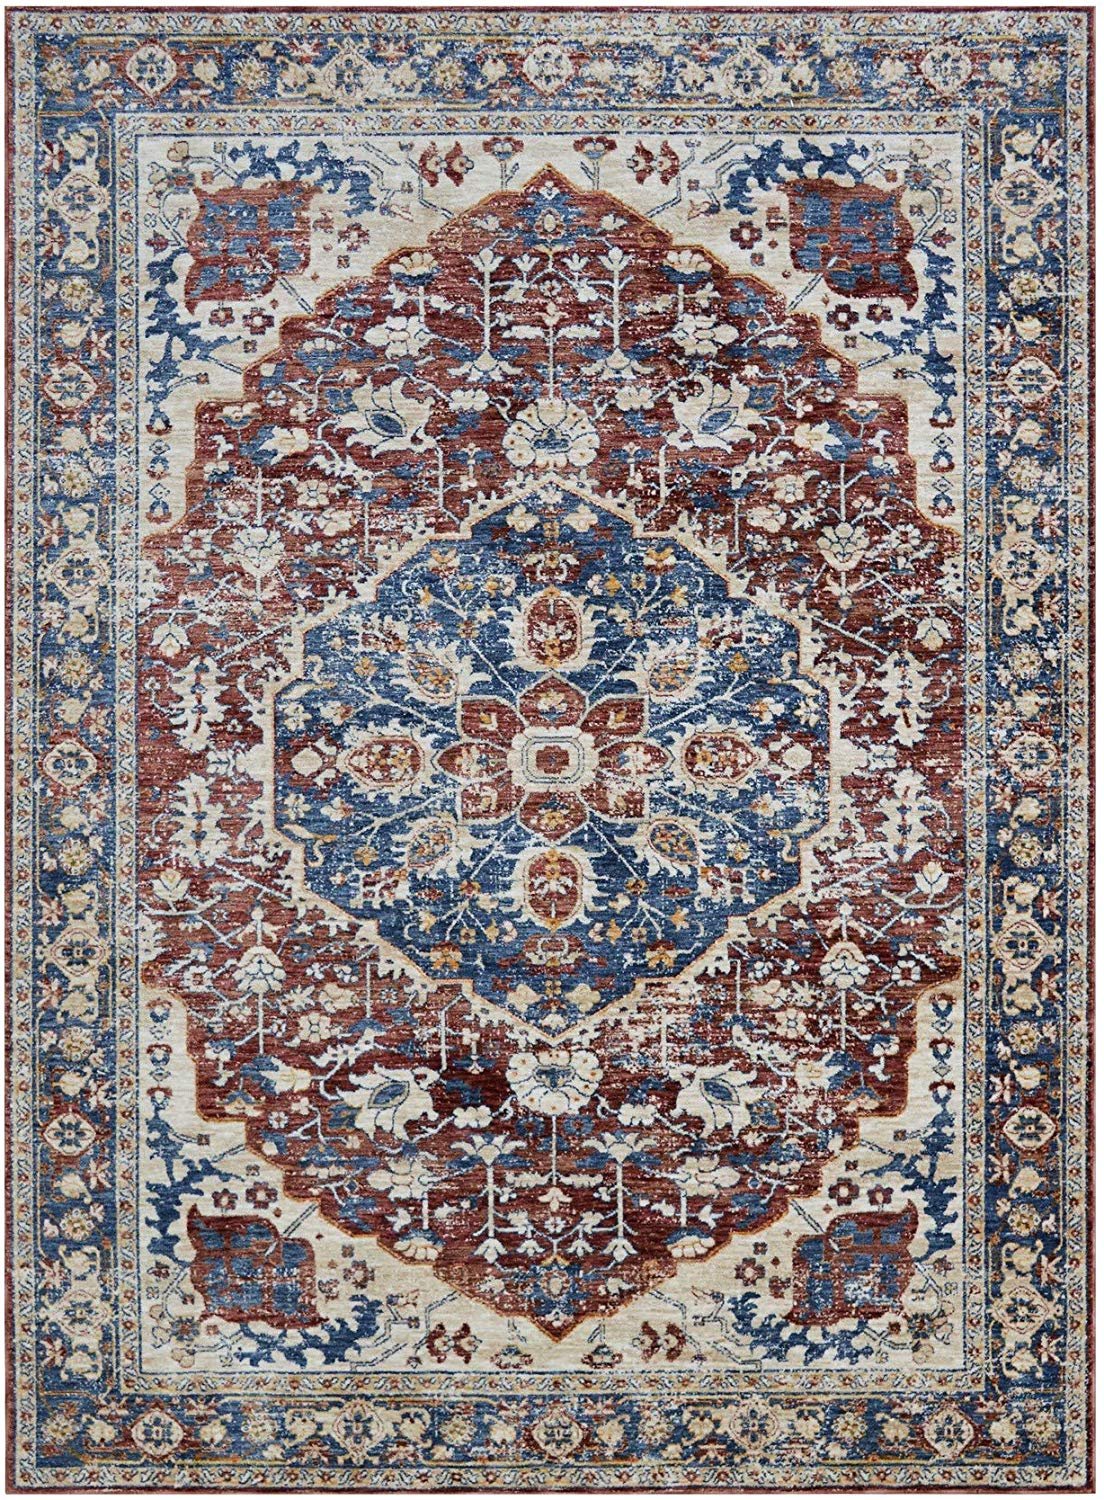 Vintage Rugs/Contemporary Persian Area Rugs-Distressed Copper/Multi (5'x7')